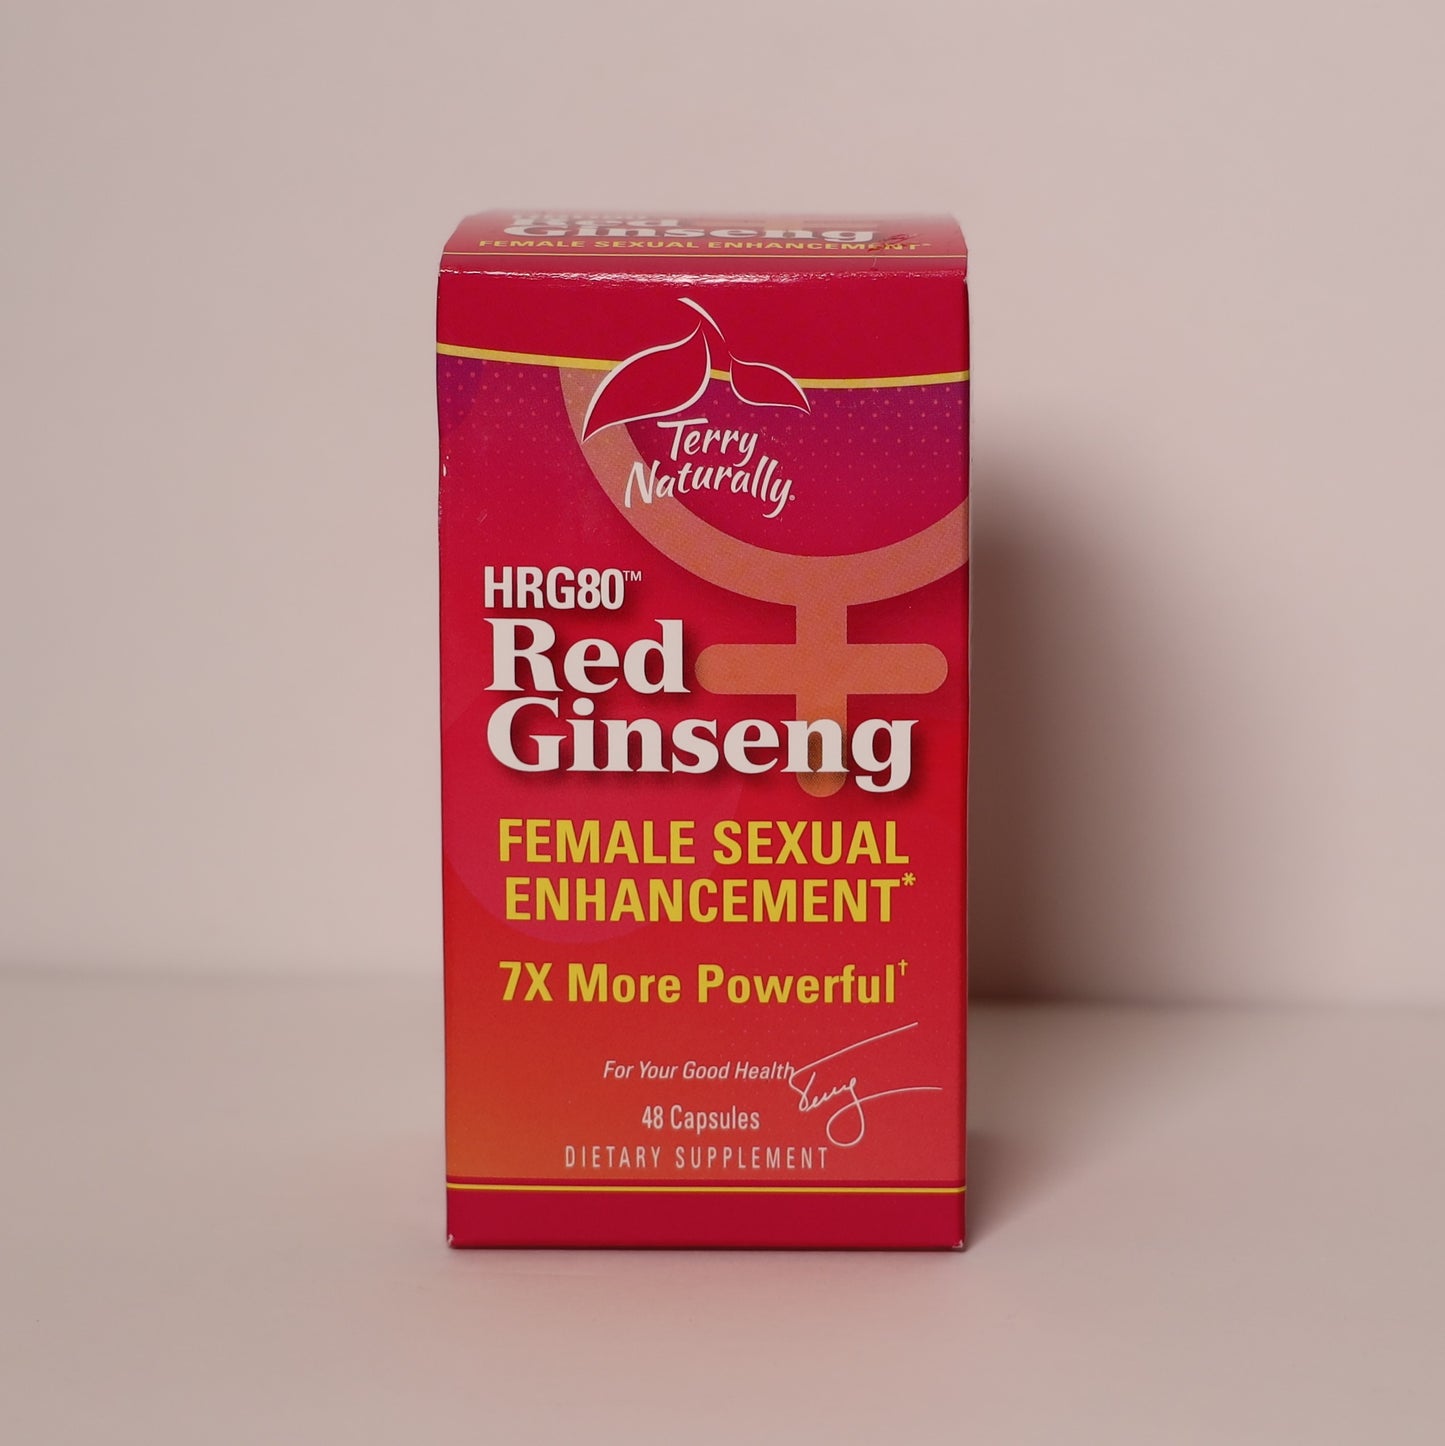 Red Ginseng Female Sexual Enhancement